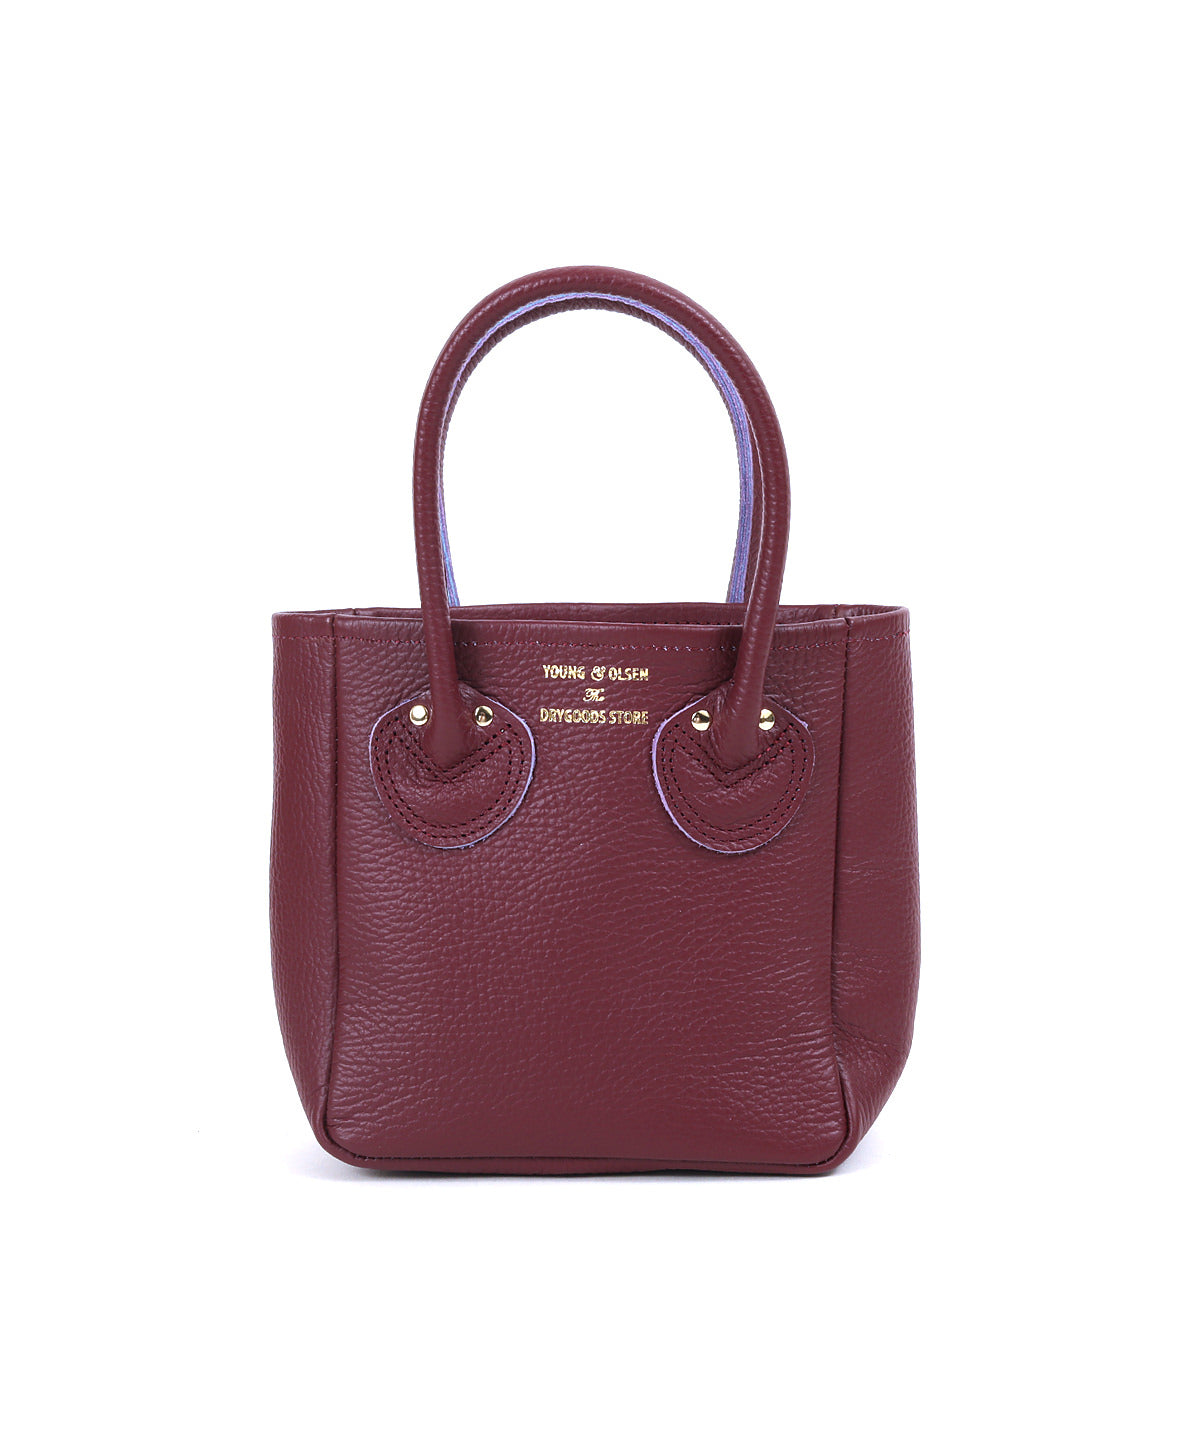 EMBOSSED LEATHER TOTE XS